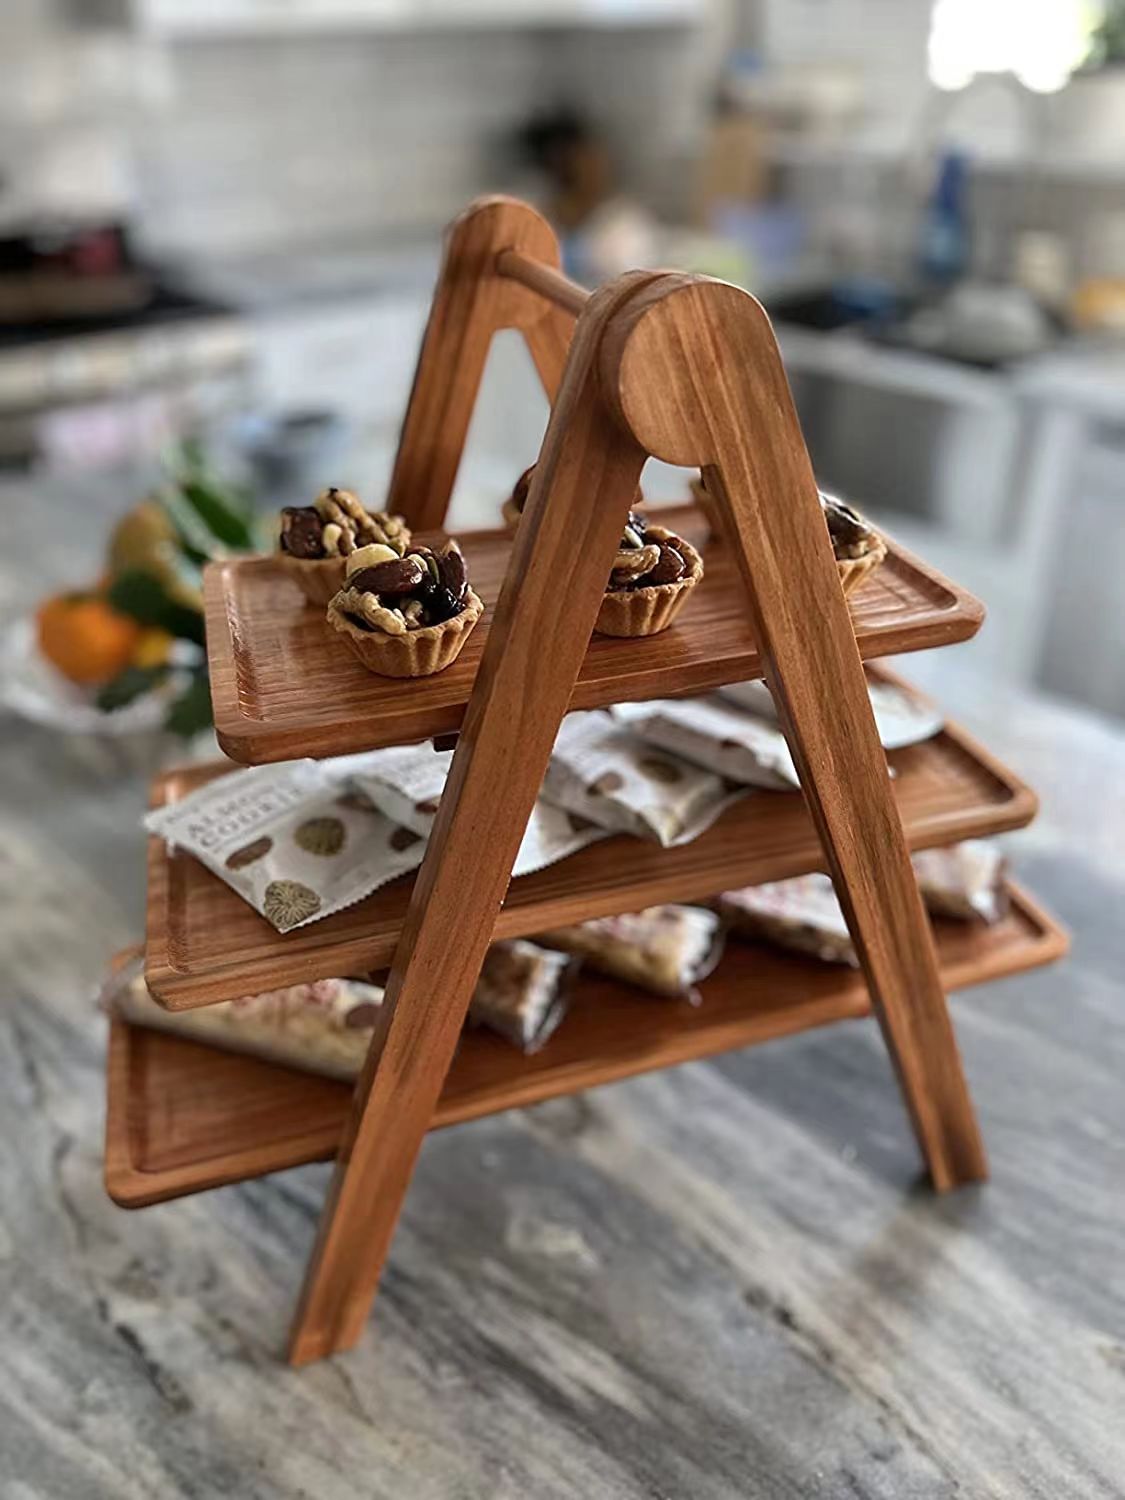 3 Tiered Serving Ladder, wood Charcuterie holder